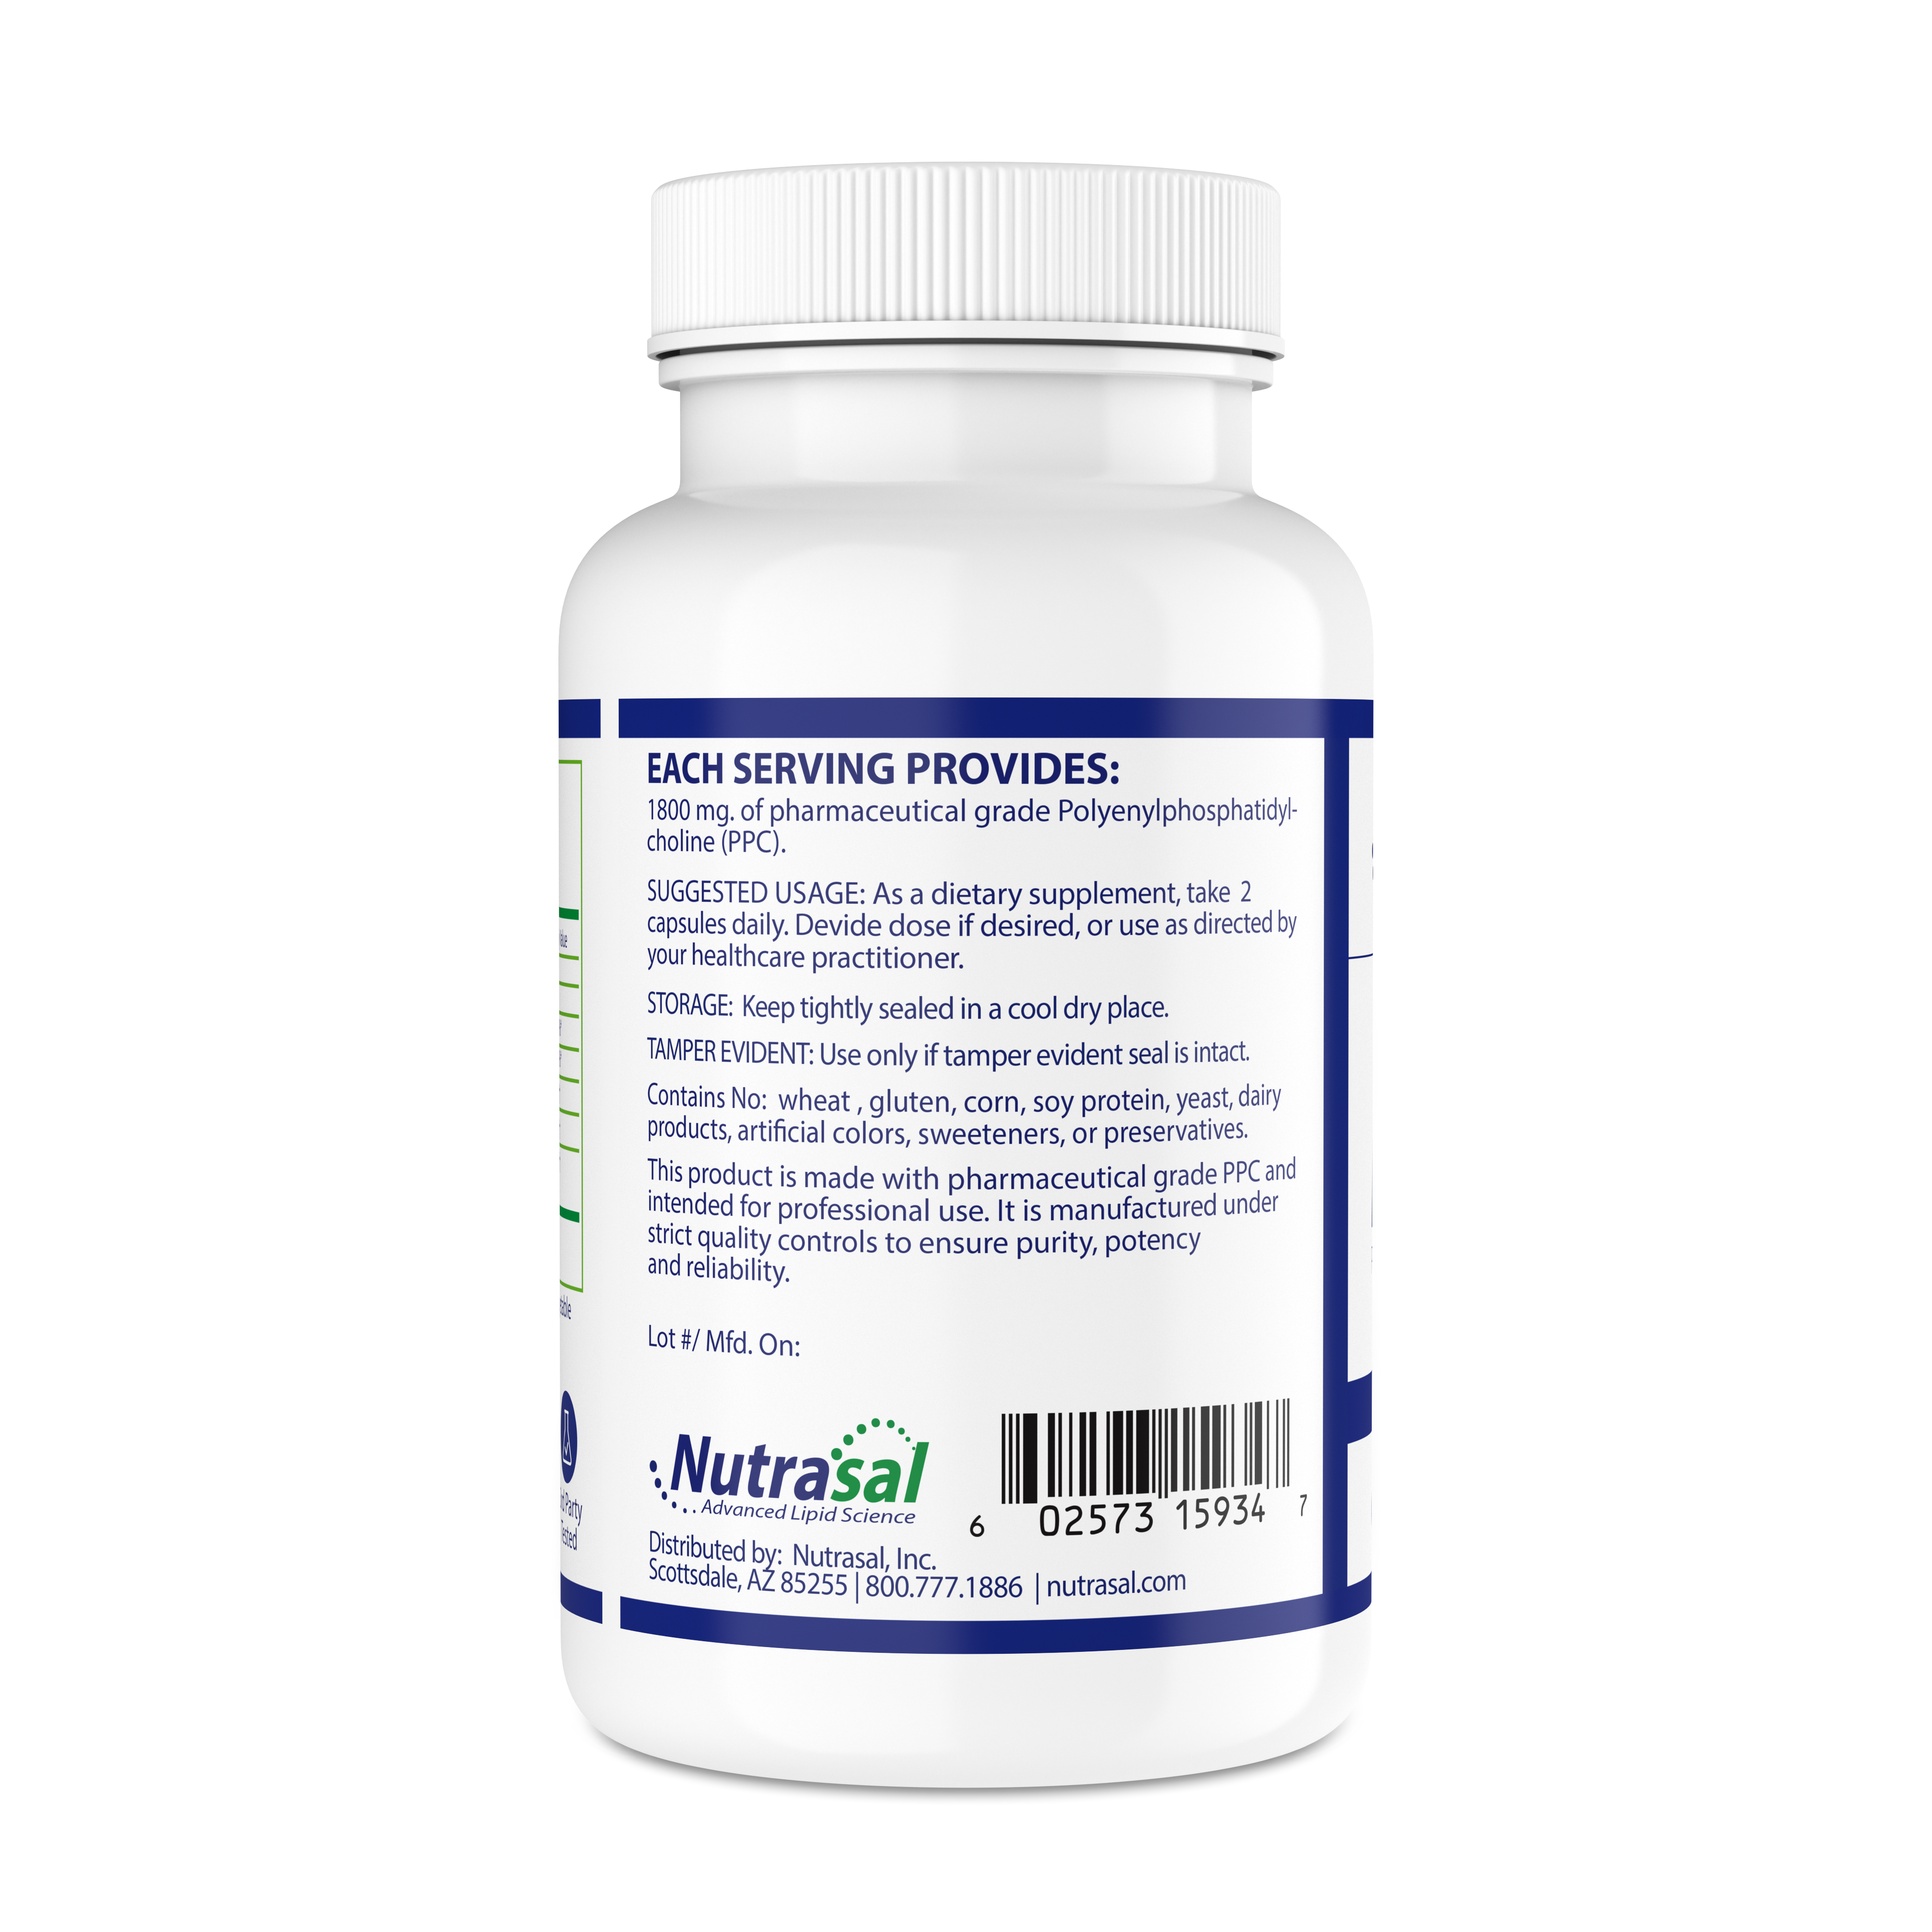 PhosChol 900 60ct. Veggie Cap Pharmaceutical Grade PPC For Cellular Repair and Healthy Gut, Liver, Brain Function